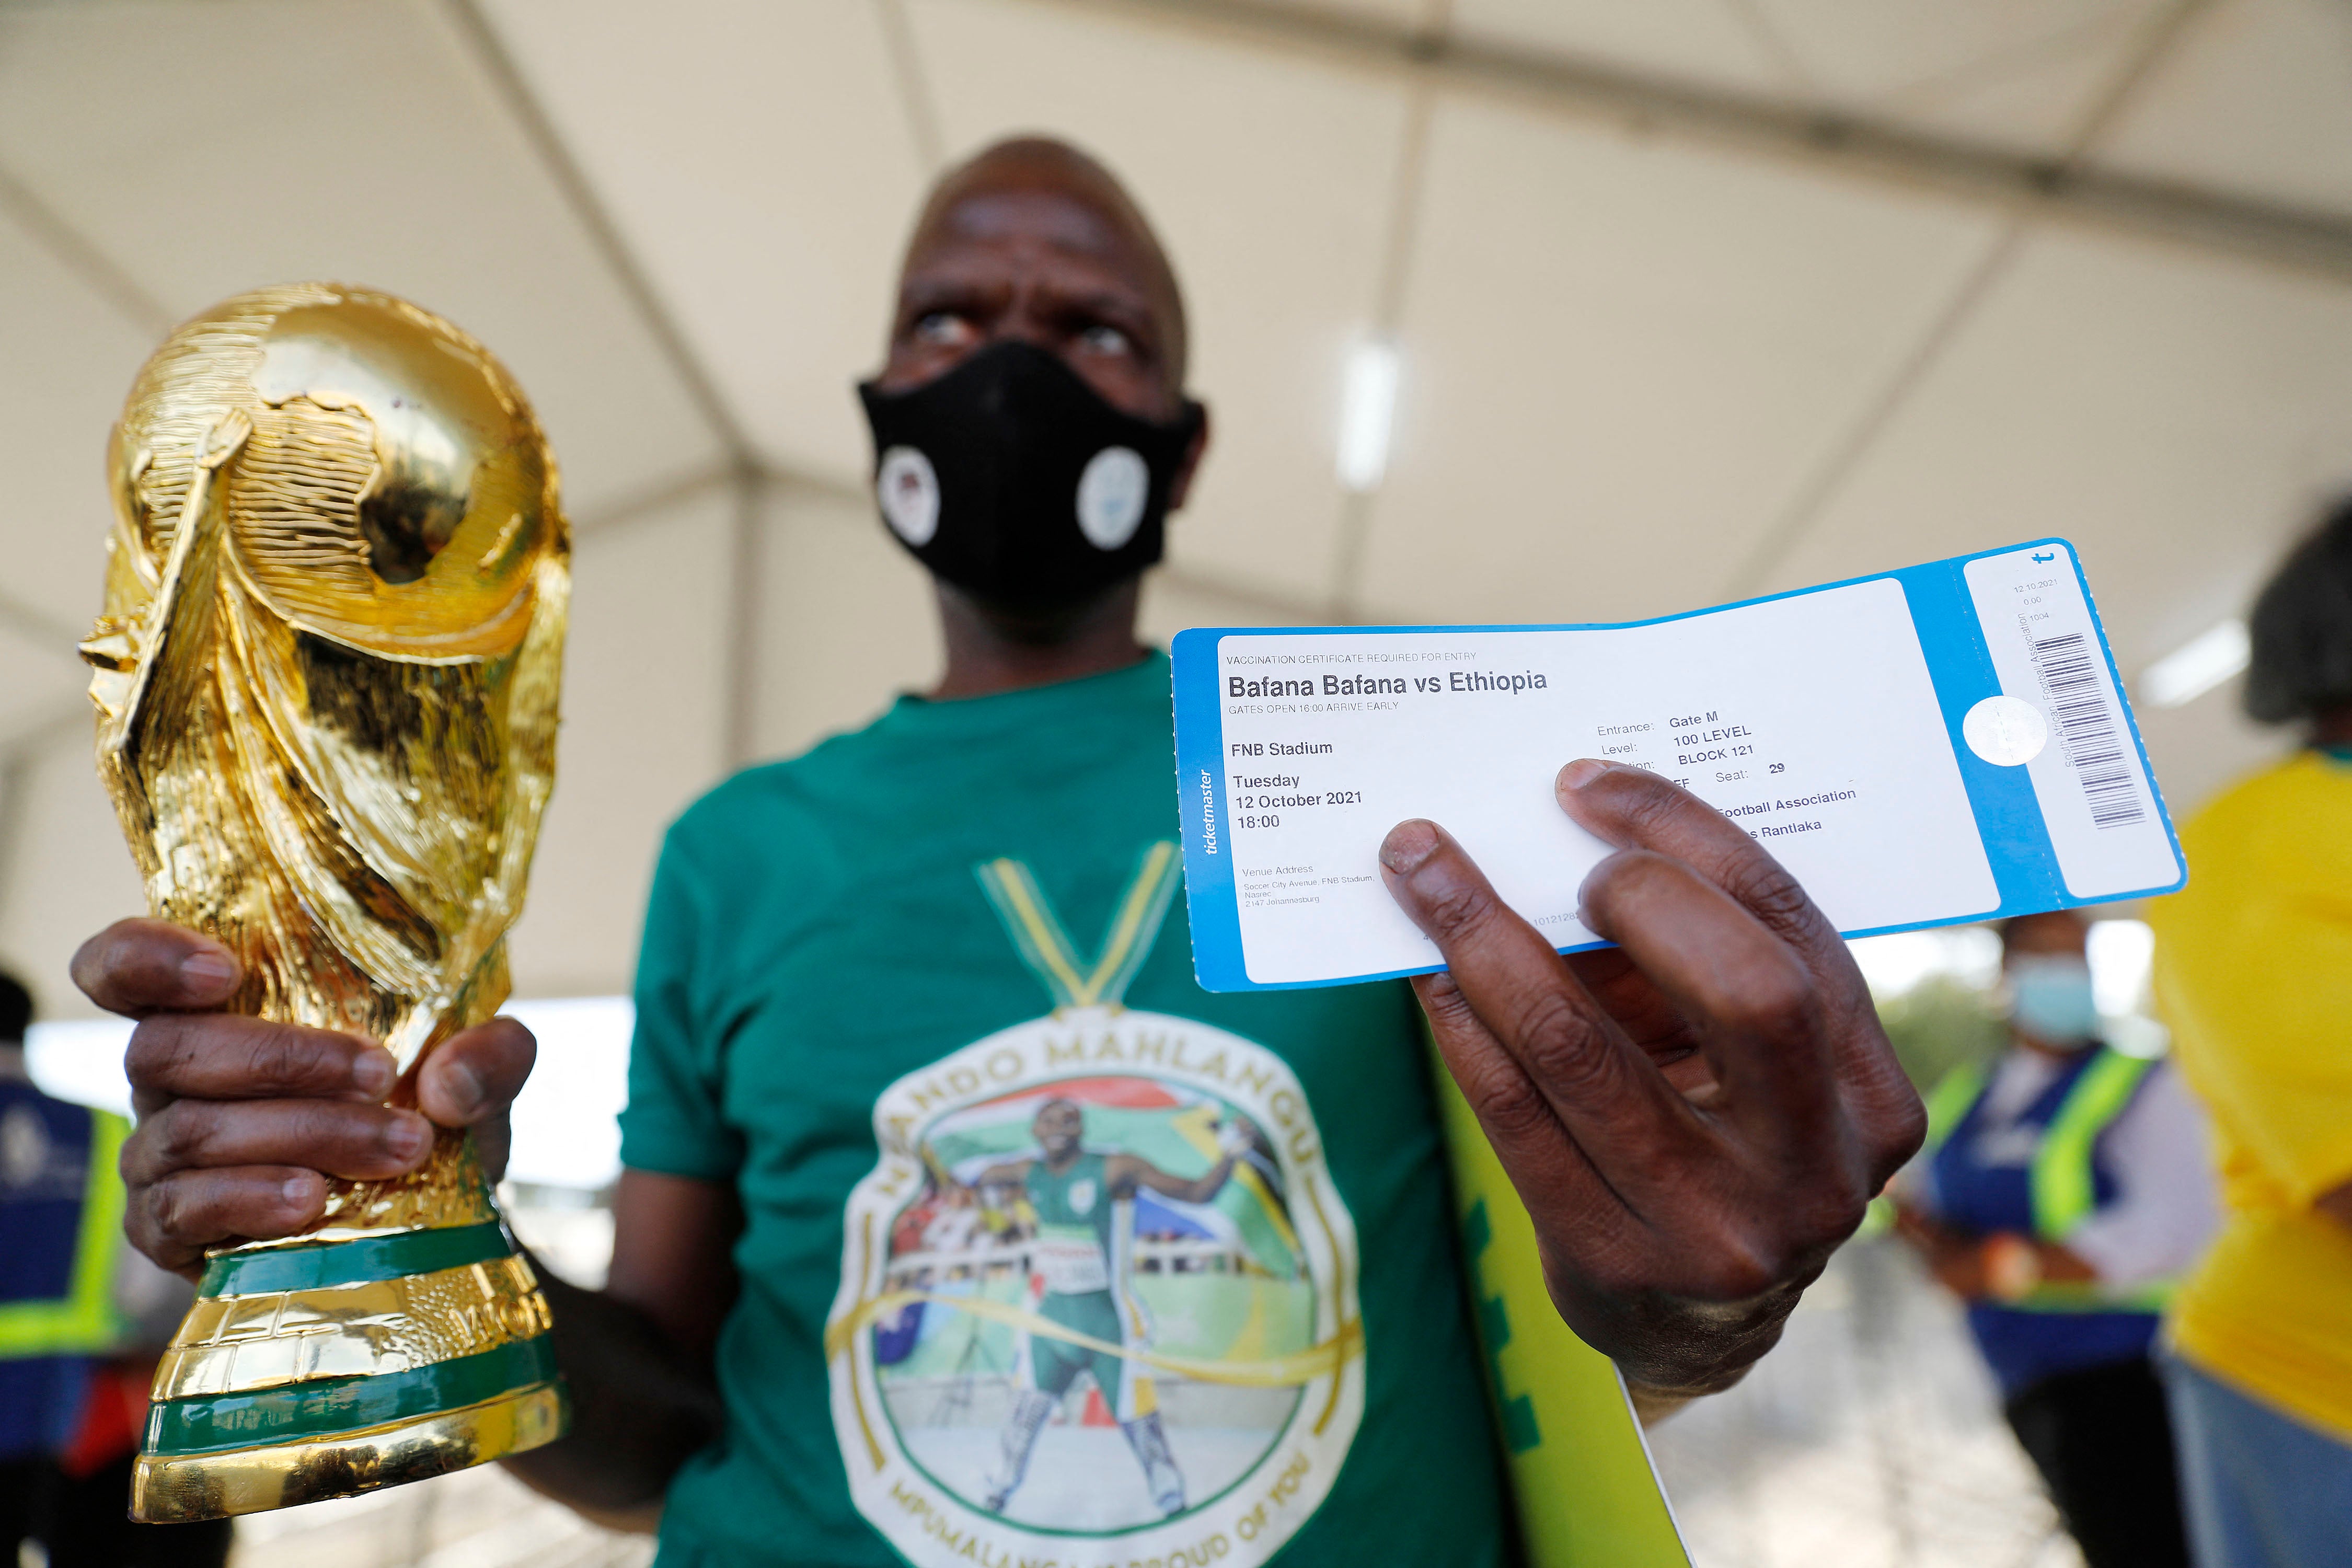 A South African national football team supporter holds his ticket